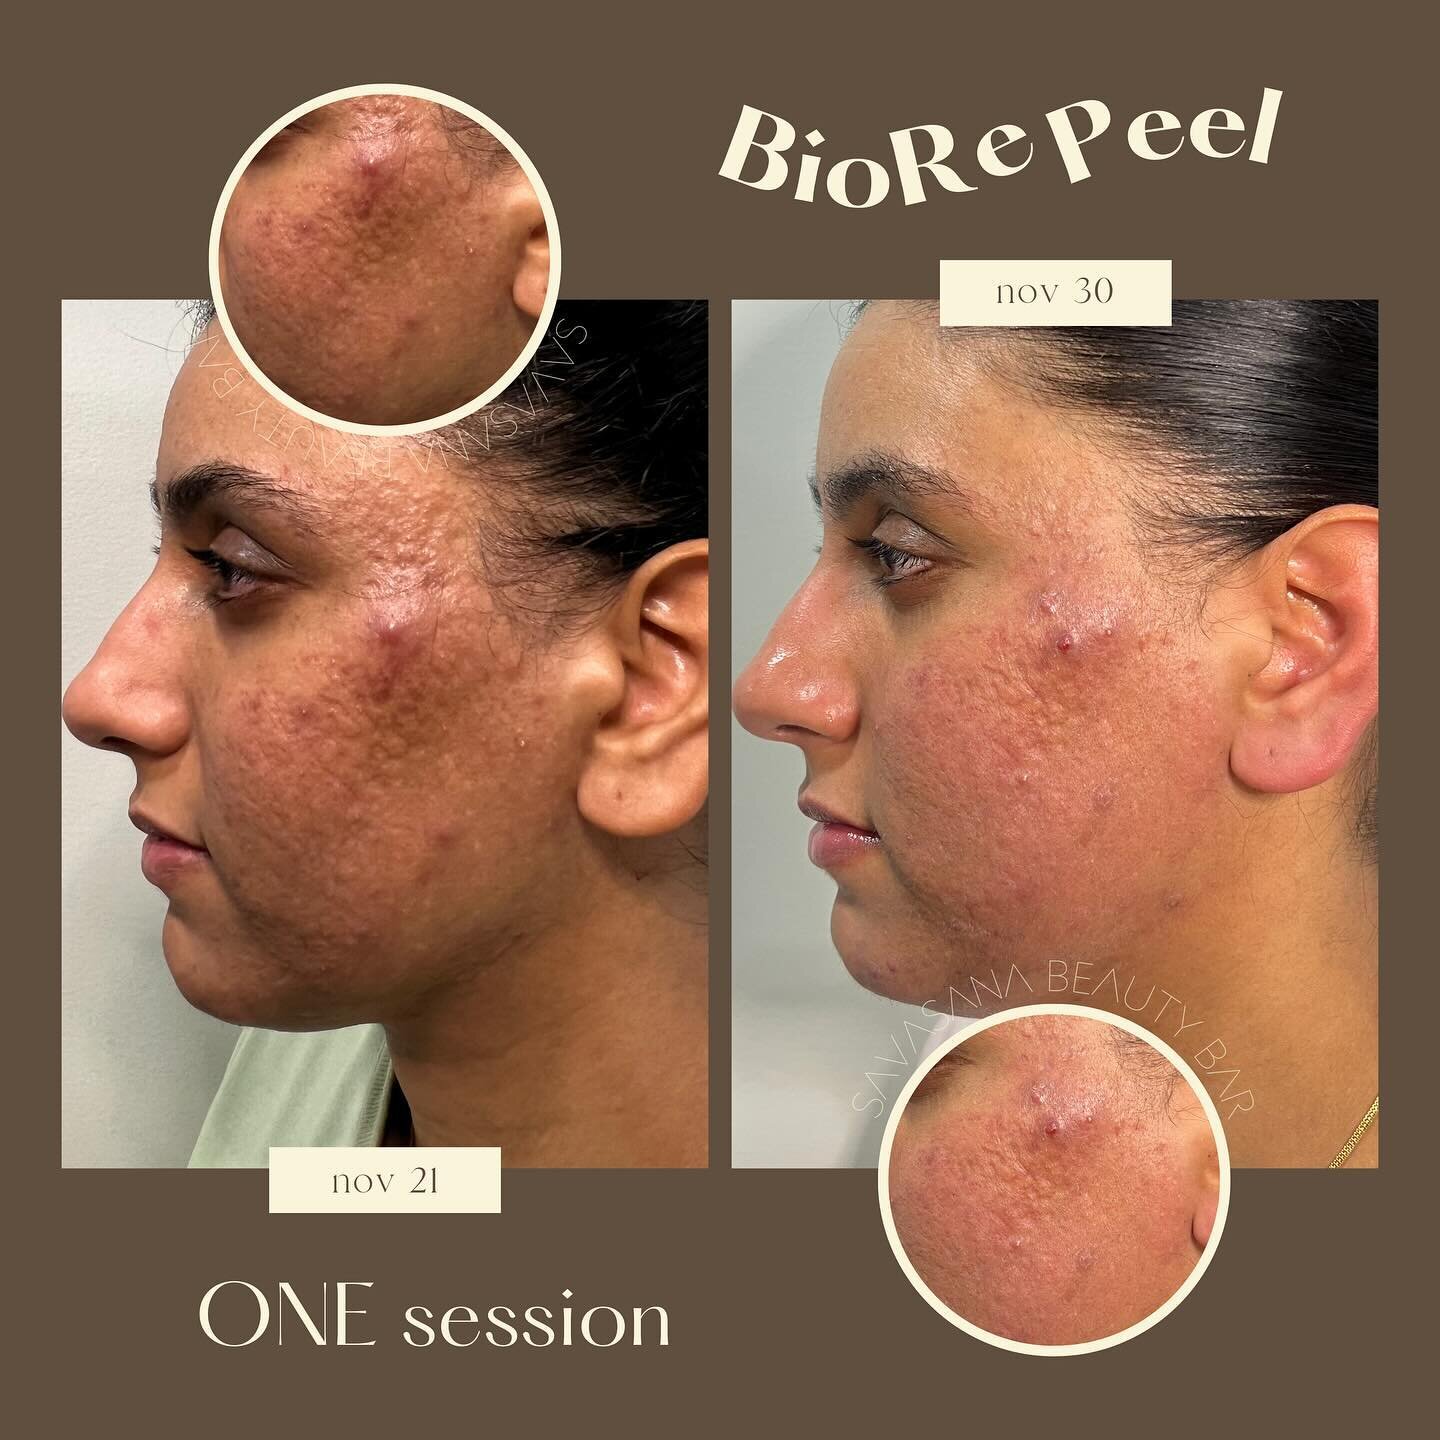 can we just take a second to SCREAM about these results?! 😱✨ jaw-dropping glow-up after just ONE BioRepeel session, spaced ten days apart! 🌟 patiently waiting to see the results after her 4-6 sessions, completed just a few weeks from now. 

how did